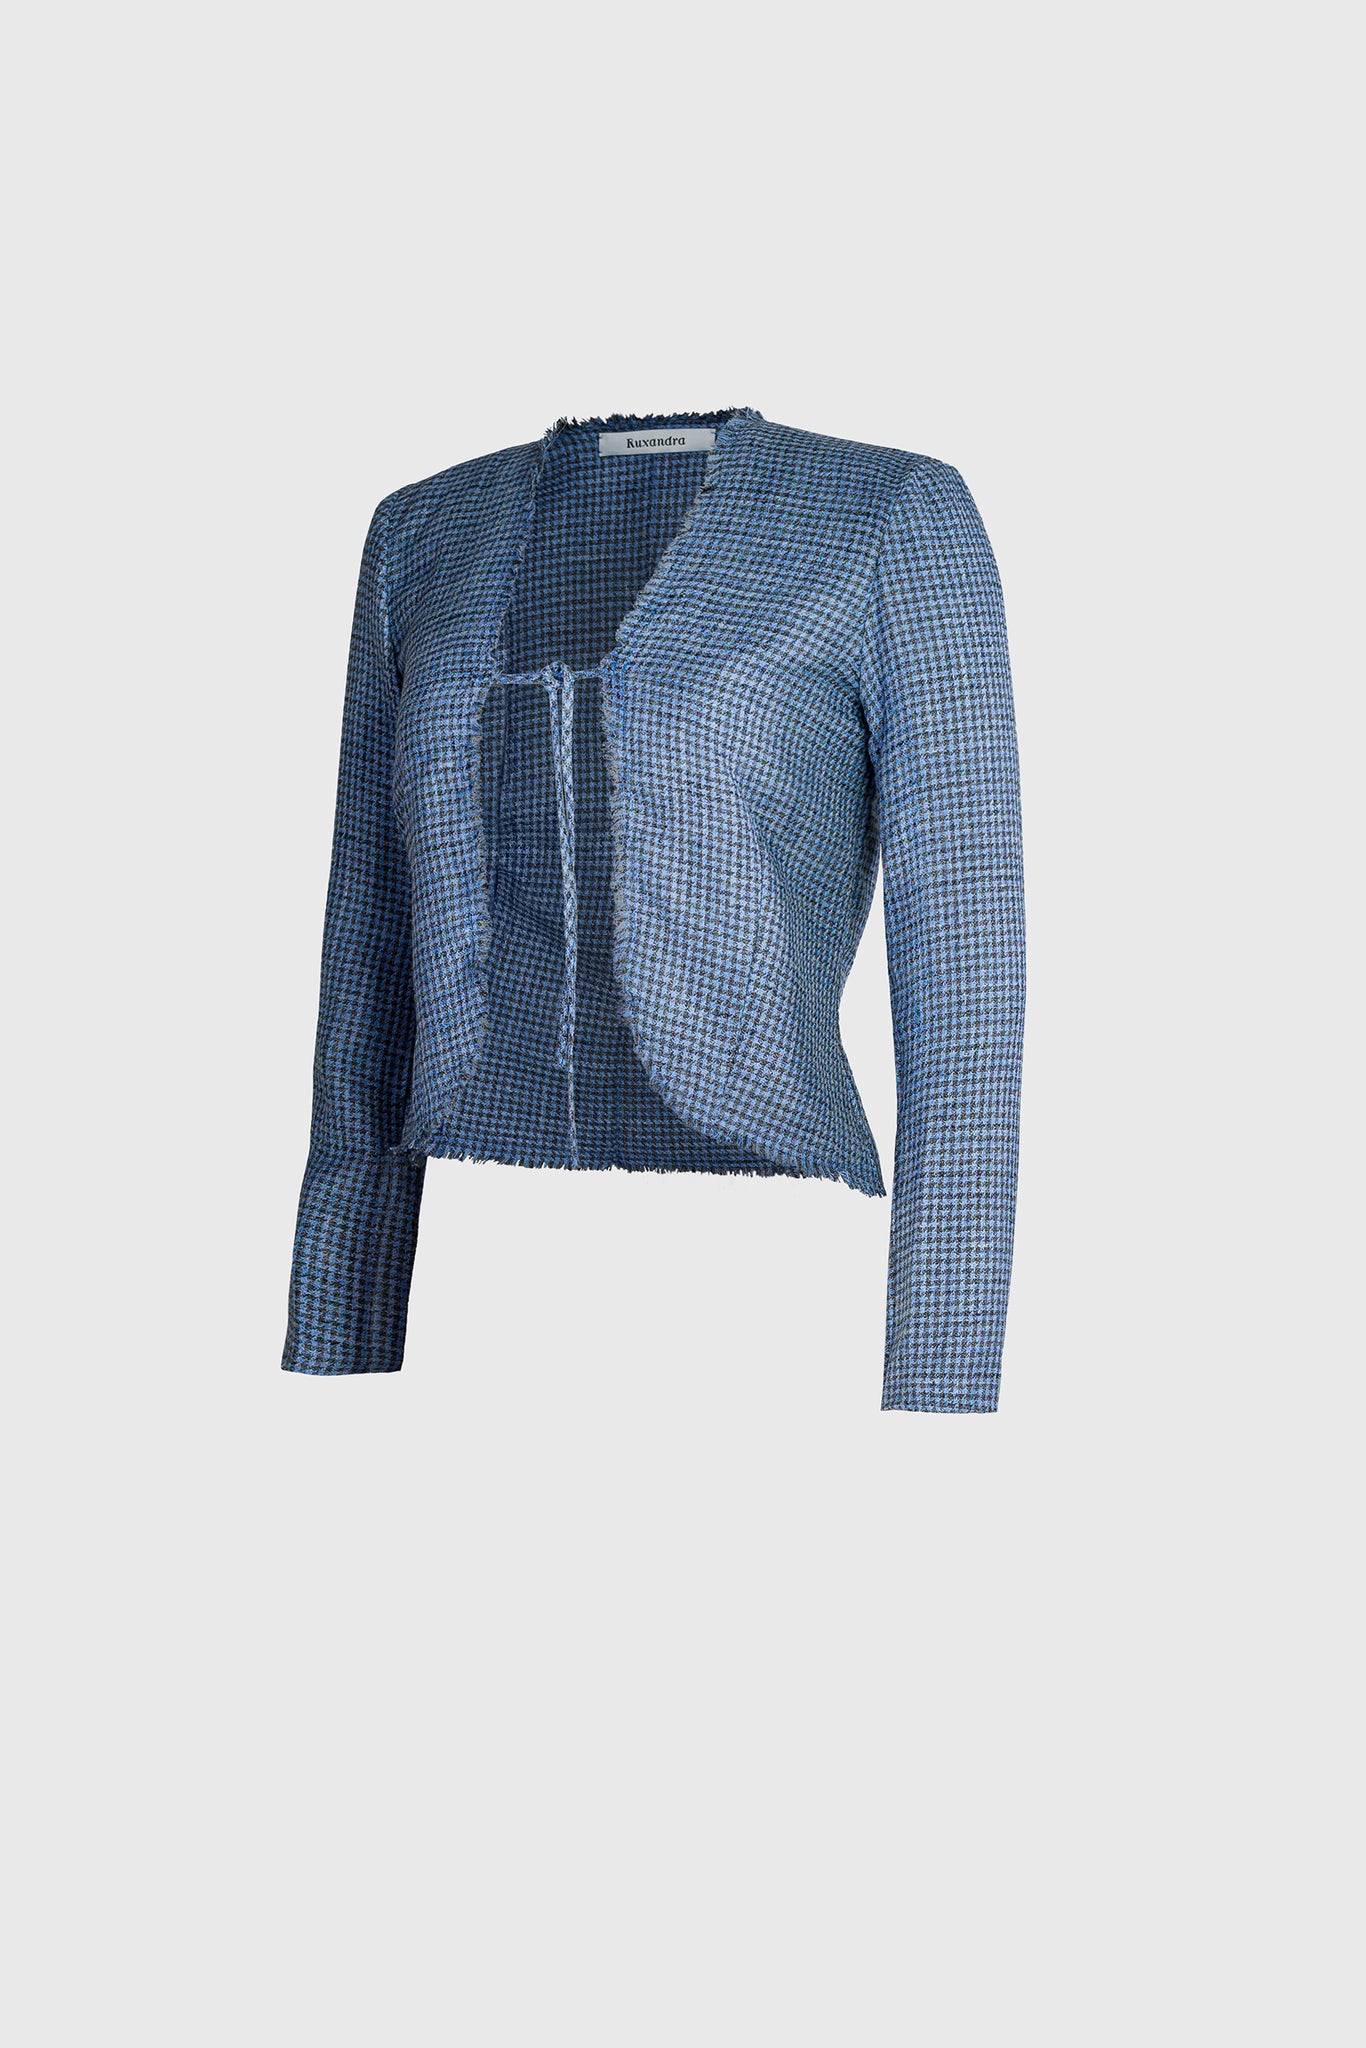 Long women's bolero, showing off, drawstring front fastening, curved, emphasizing your hips and figure, long sleeves, elegant touch, exquisite luxury Italian textile, silk super merinos wool and linen, beautiful marine blue, avatar blue